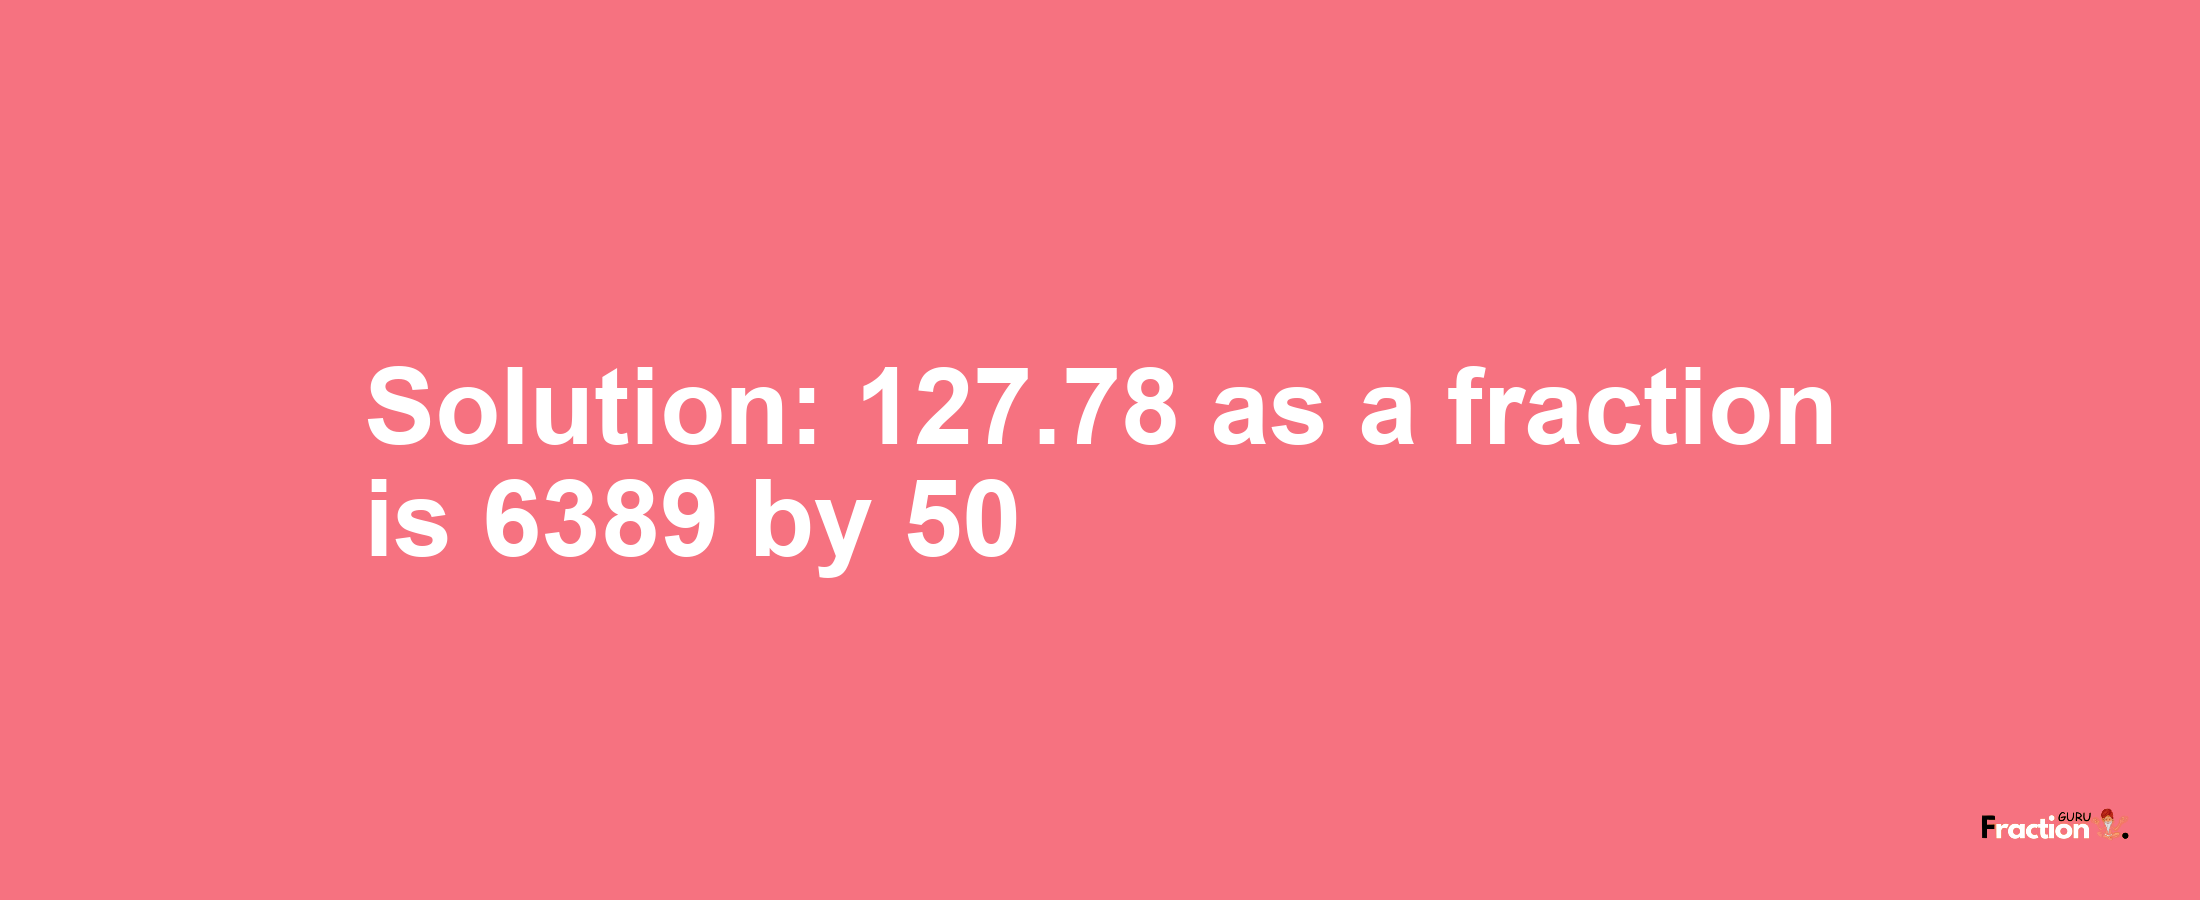 Solution:127.78 as a fraction is 6389/50